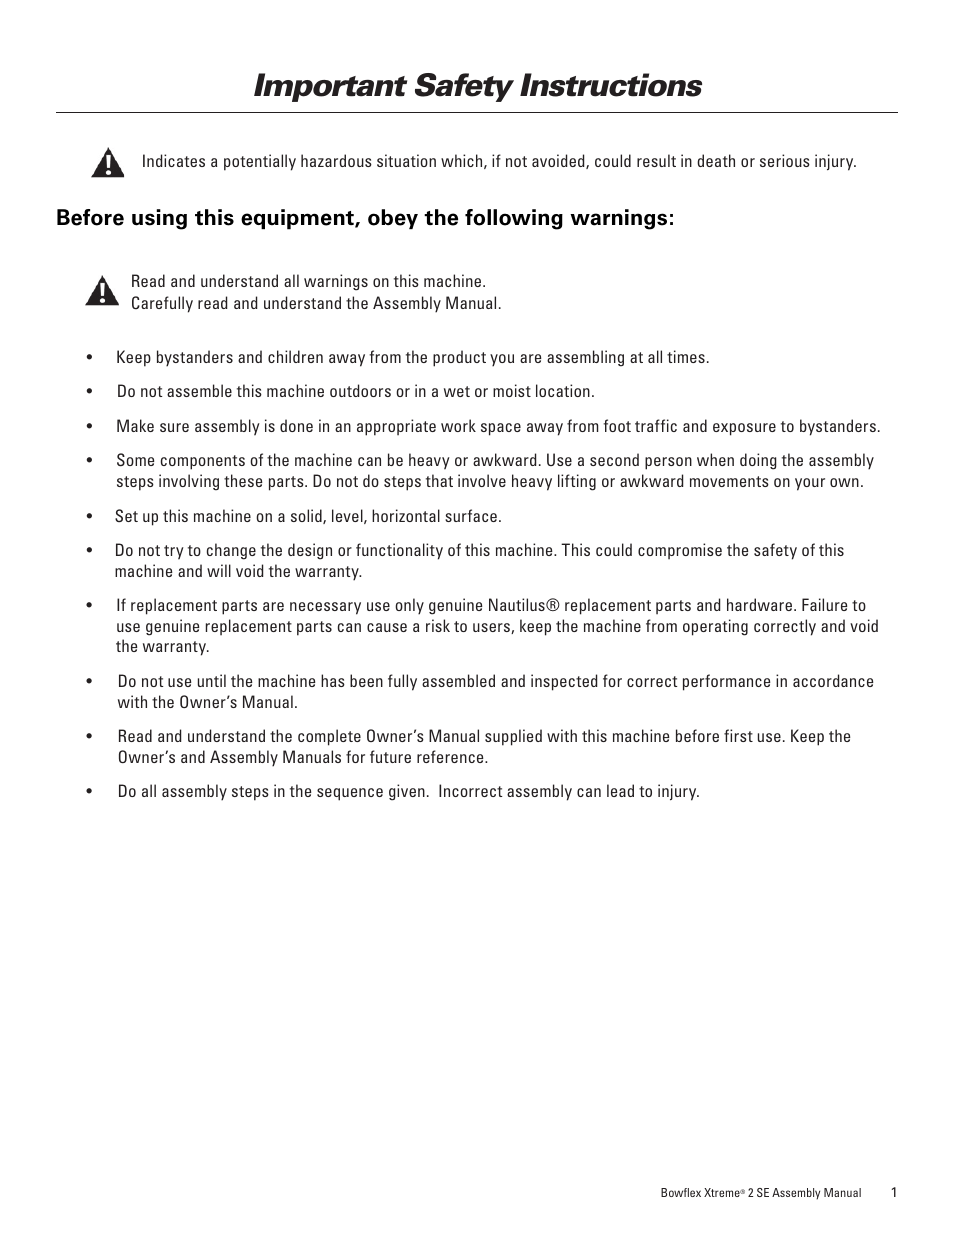 Important safety instructions | Bowflex Xtreme 2 SE User Manual | Page 5 / 28